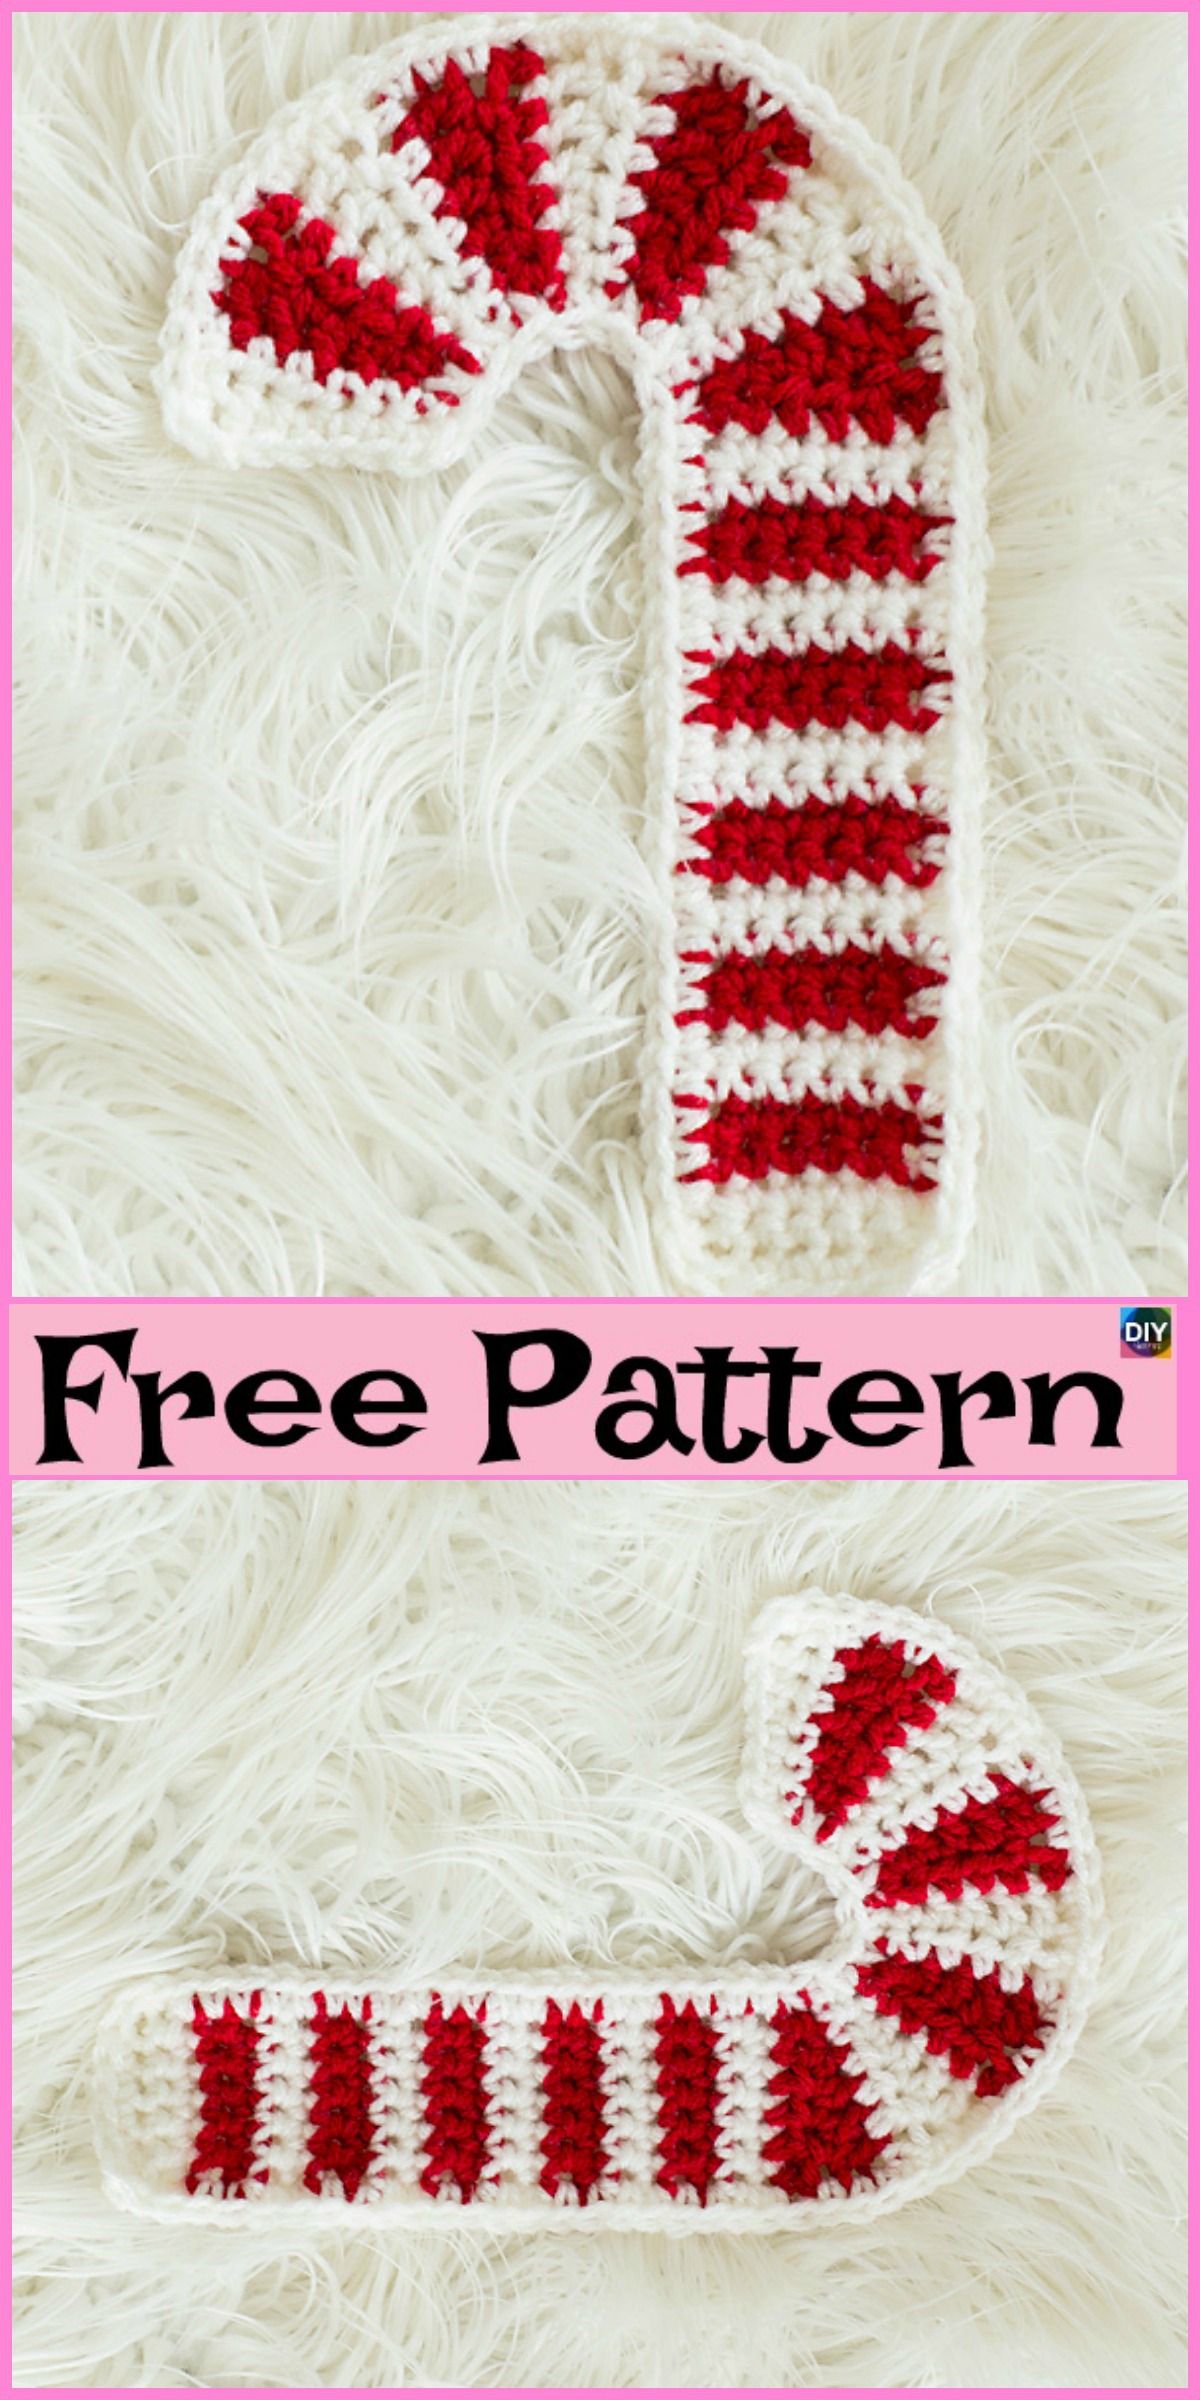 diy4ever-Easy Crochet Candy Canes - Free Pattern.